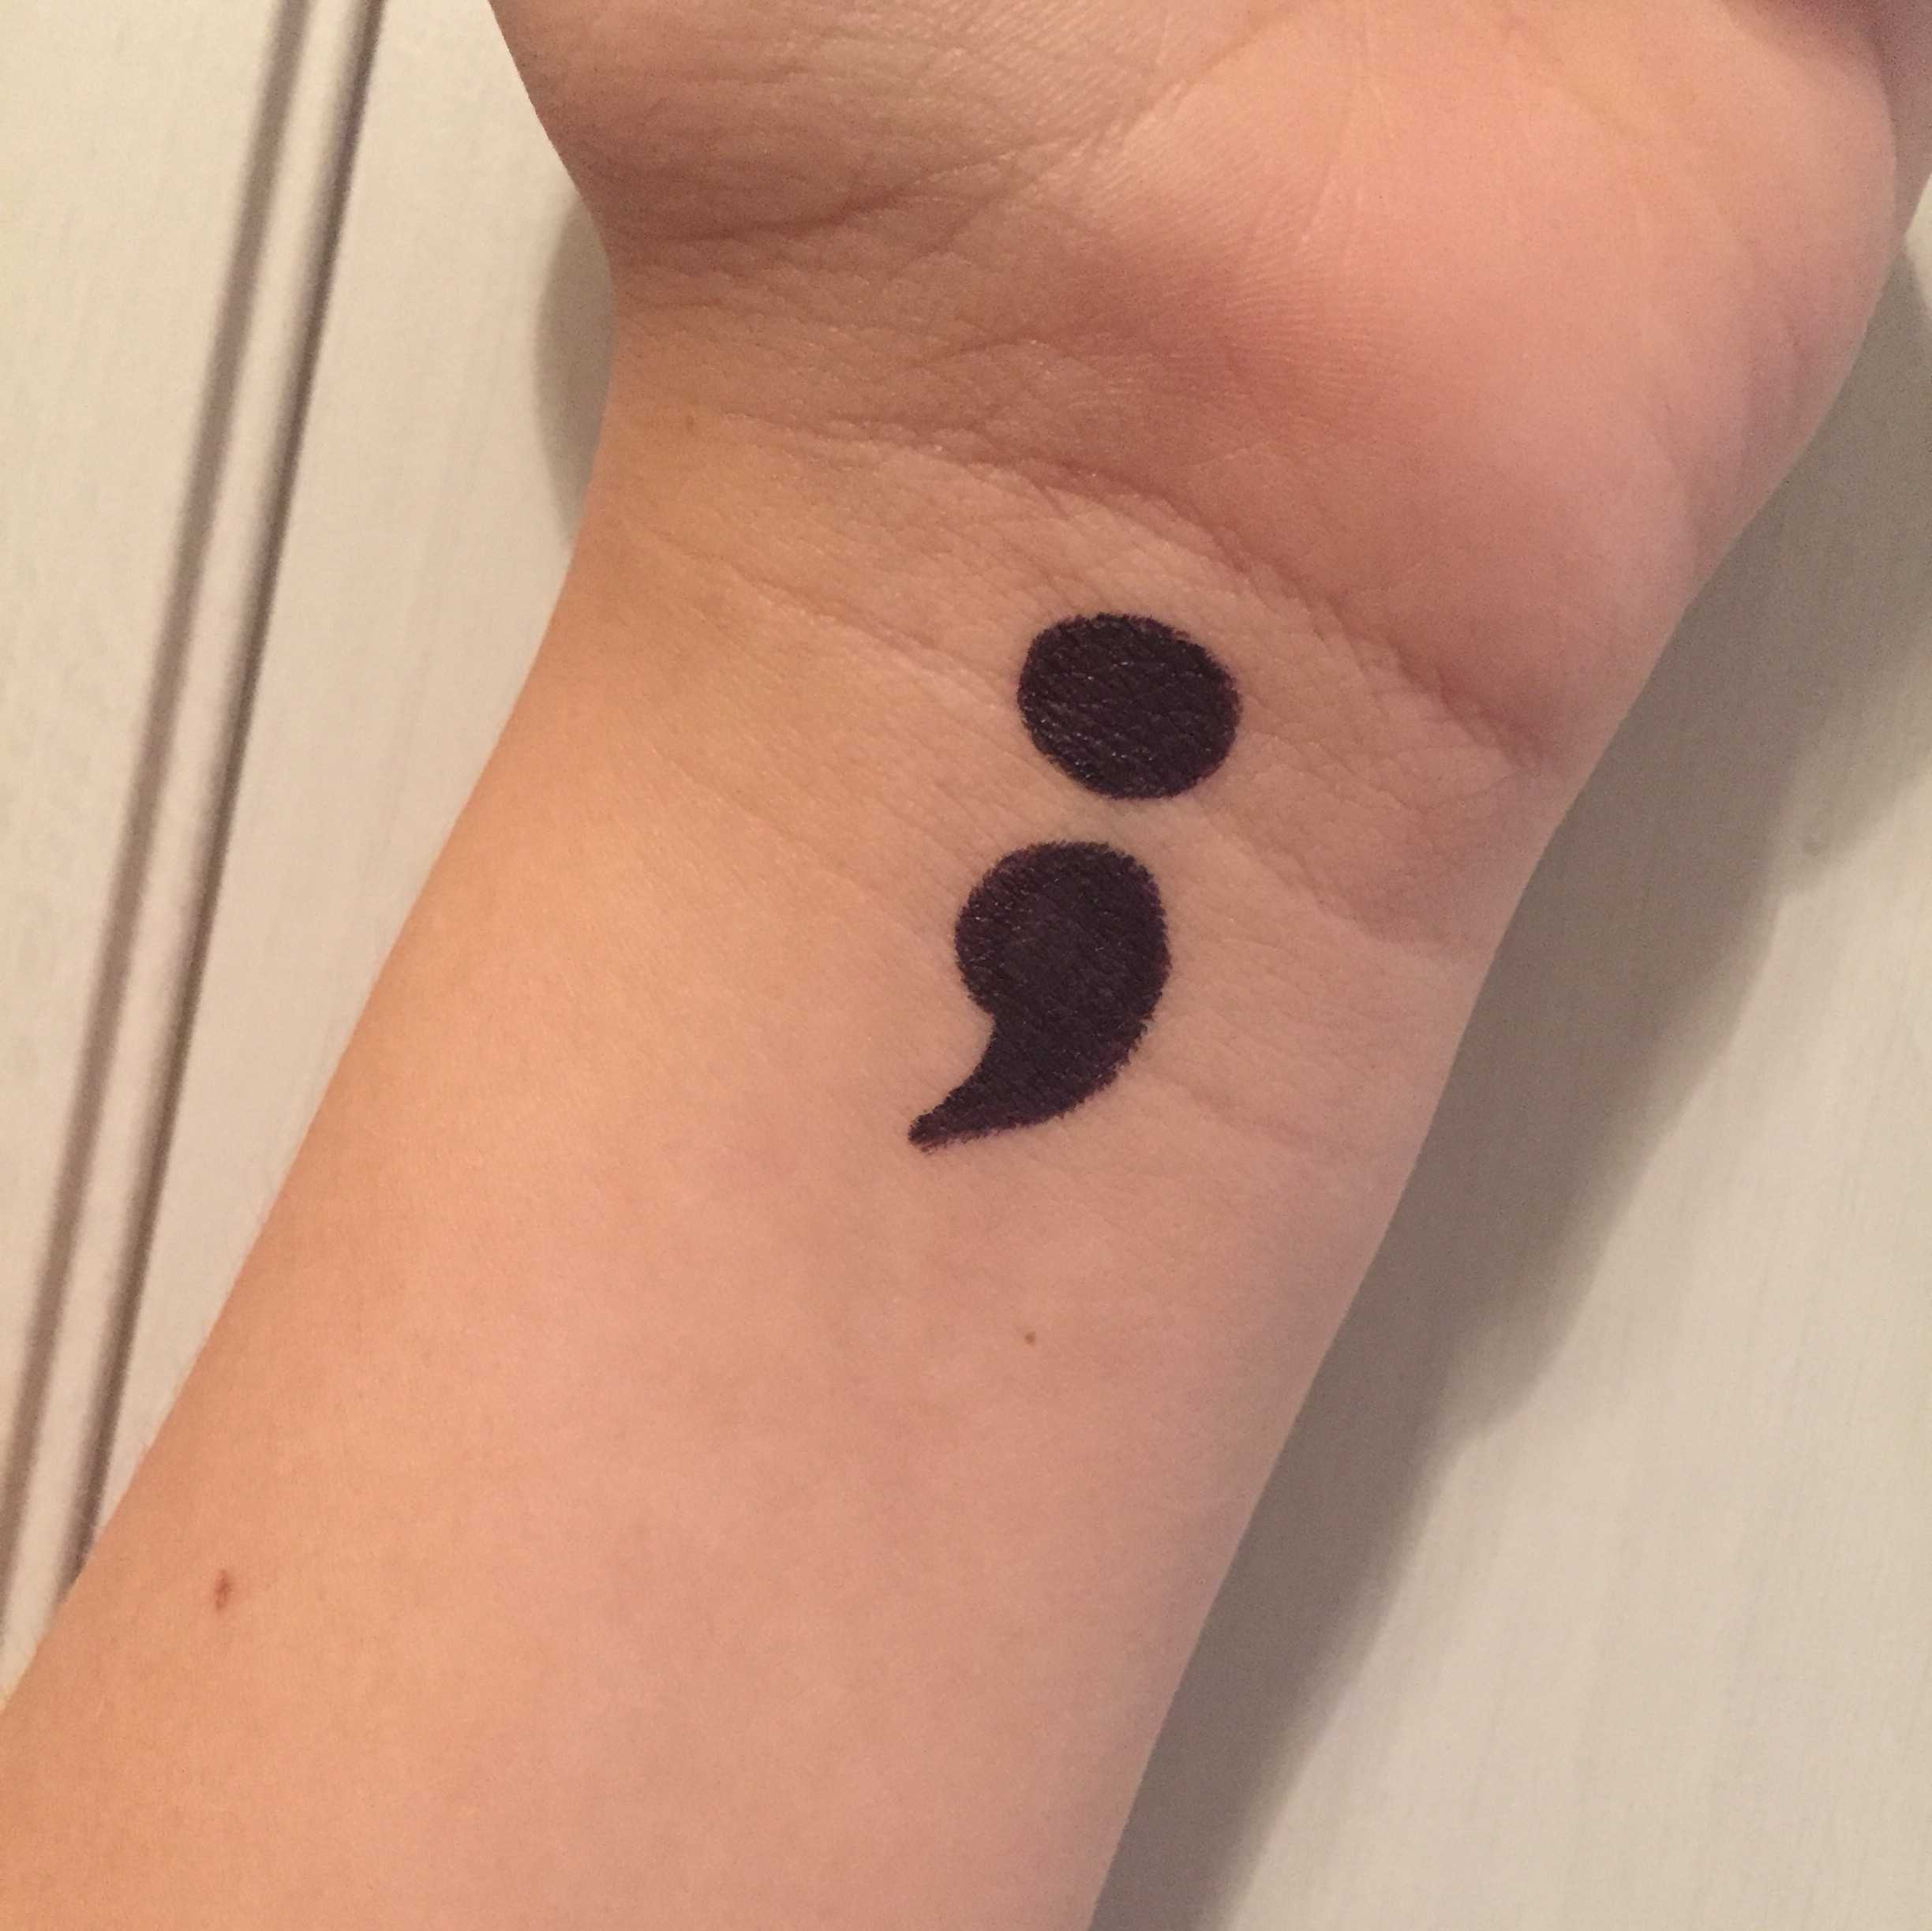 Semicolon Tattoo: A Powerful Symbol of Hope and Resilience